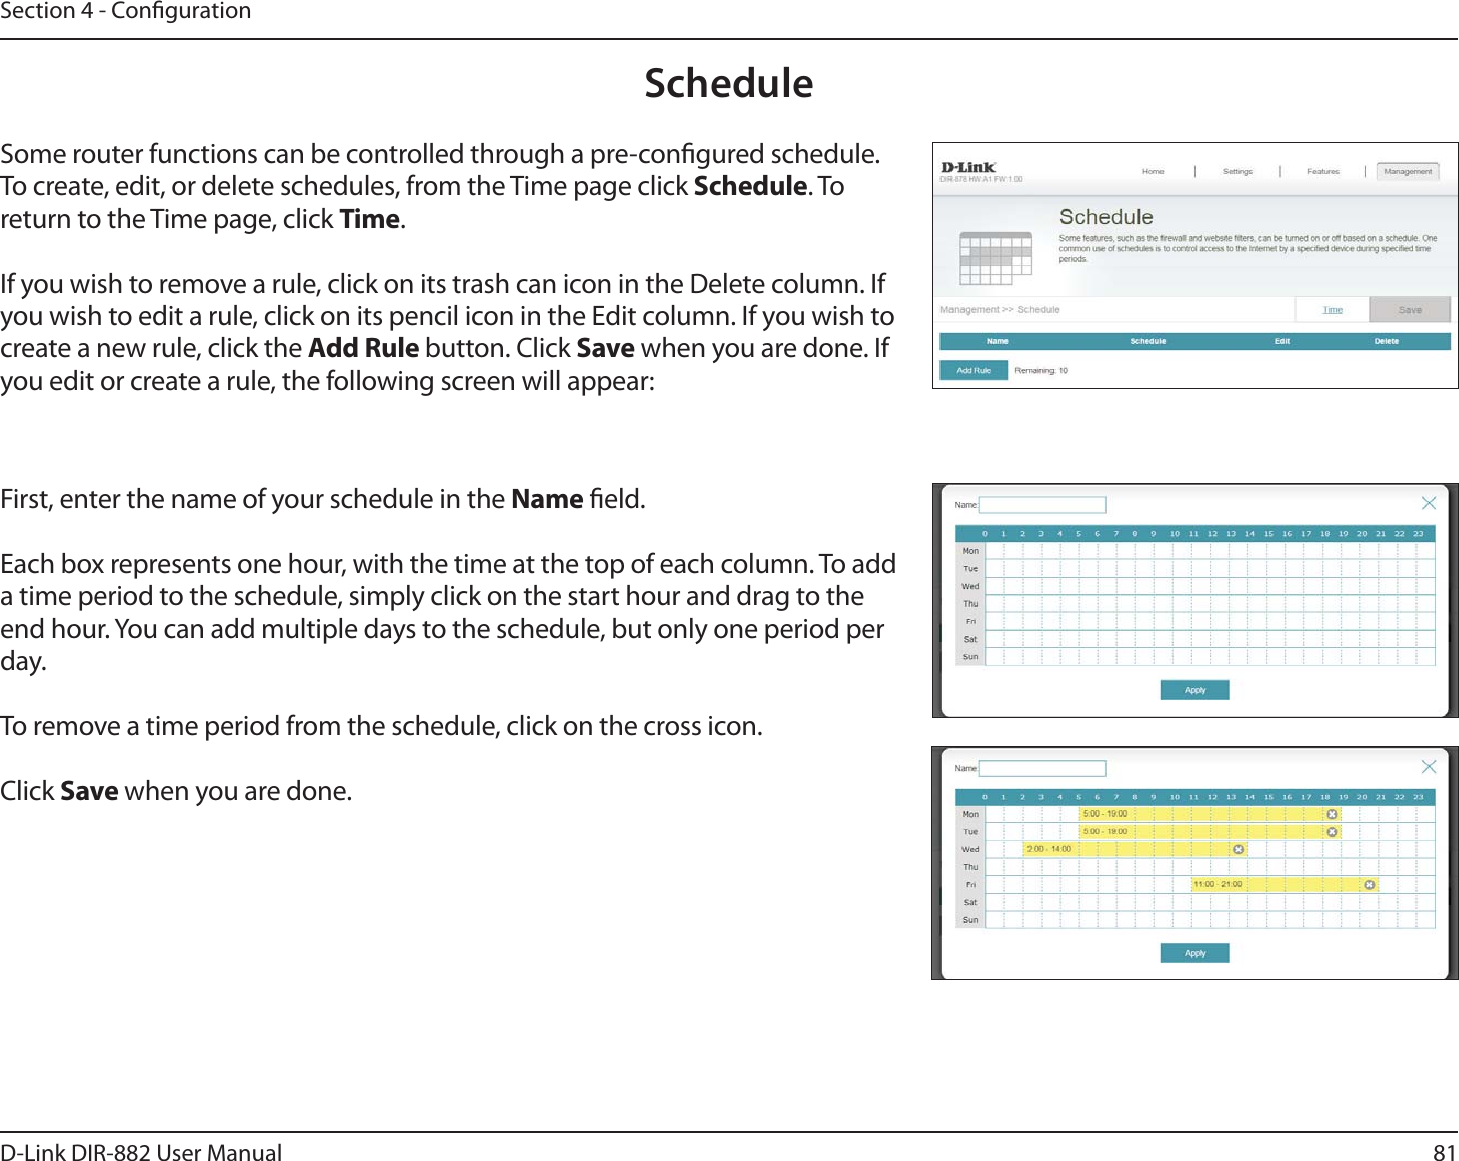 81D-Link DIR-882 User ManualSection 4 - CongurationScheduleSome router functions can be controlled through a pre-congured schedule. To create, edit, or delete schedules, from the Time page click Schedule. To return to the Time page, click Time. If you wish to remove a rule, click on its trash can icon in the Delete column. If you wish to edit a rule, click on its pencil icon in the Edit column. If you wish to create a new rule, click the &quot;EE3VMFbutton. Click Save when you are done. If you edit or create a rule, the following screen will appear:First, enter the name of your schedule in the Name eld.Each box represents one hour, with the time at the top of each column. To add a time period to the schedule, simply click on the start hour and drag to the end hour. You can add multiple days to the schedule, but only one period per day.To remove a time period from the schedule, click on the cross icon.Click Save when you are done.